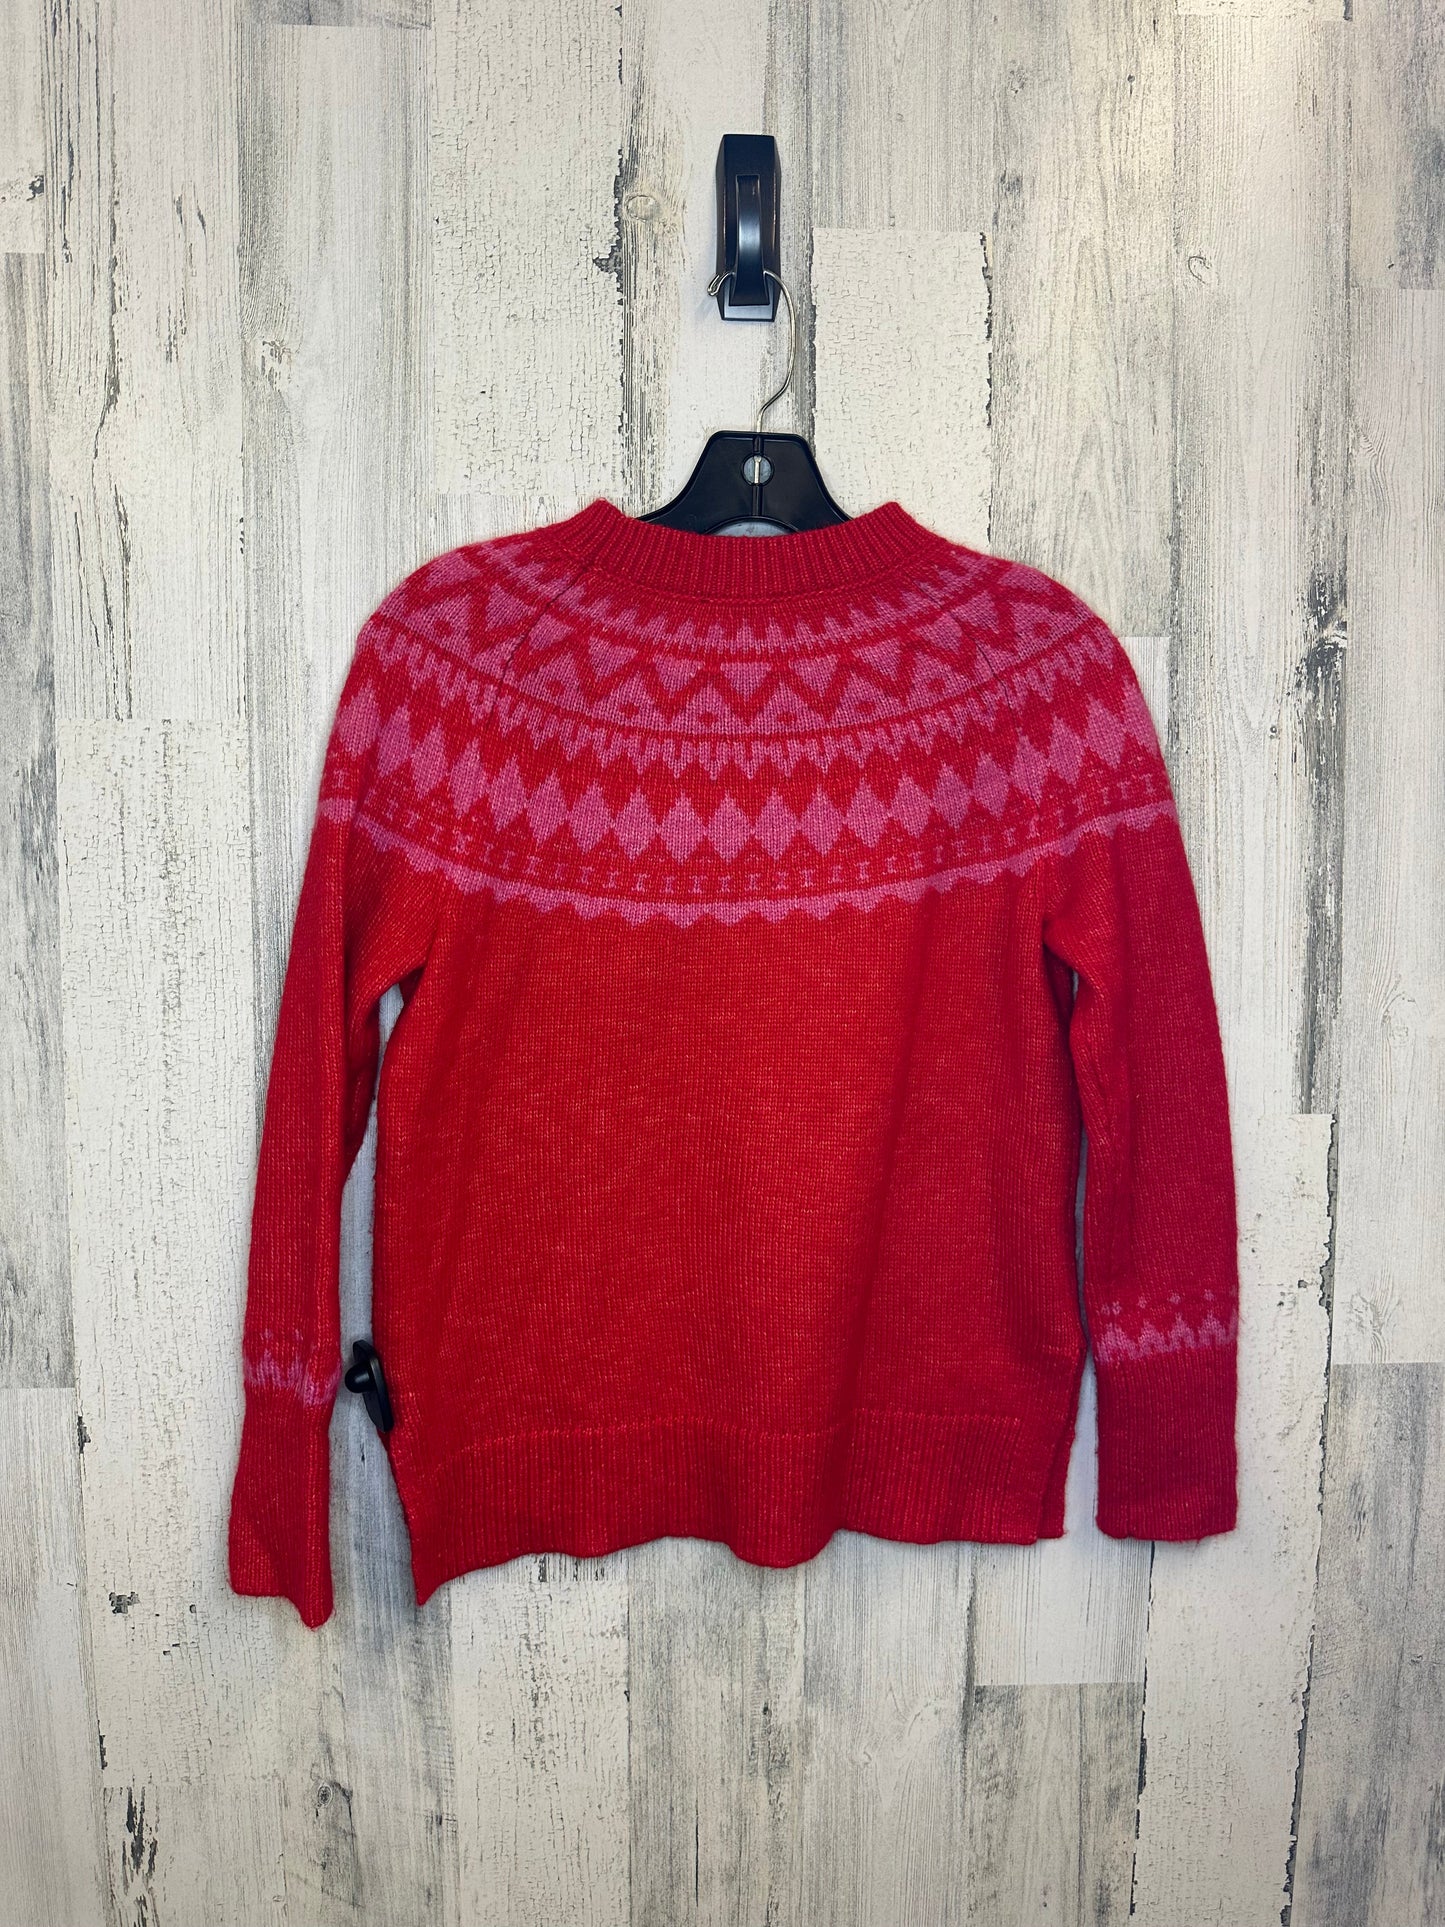 Sweater By Talbots  Size: Xs